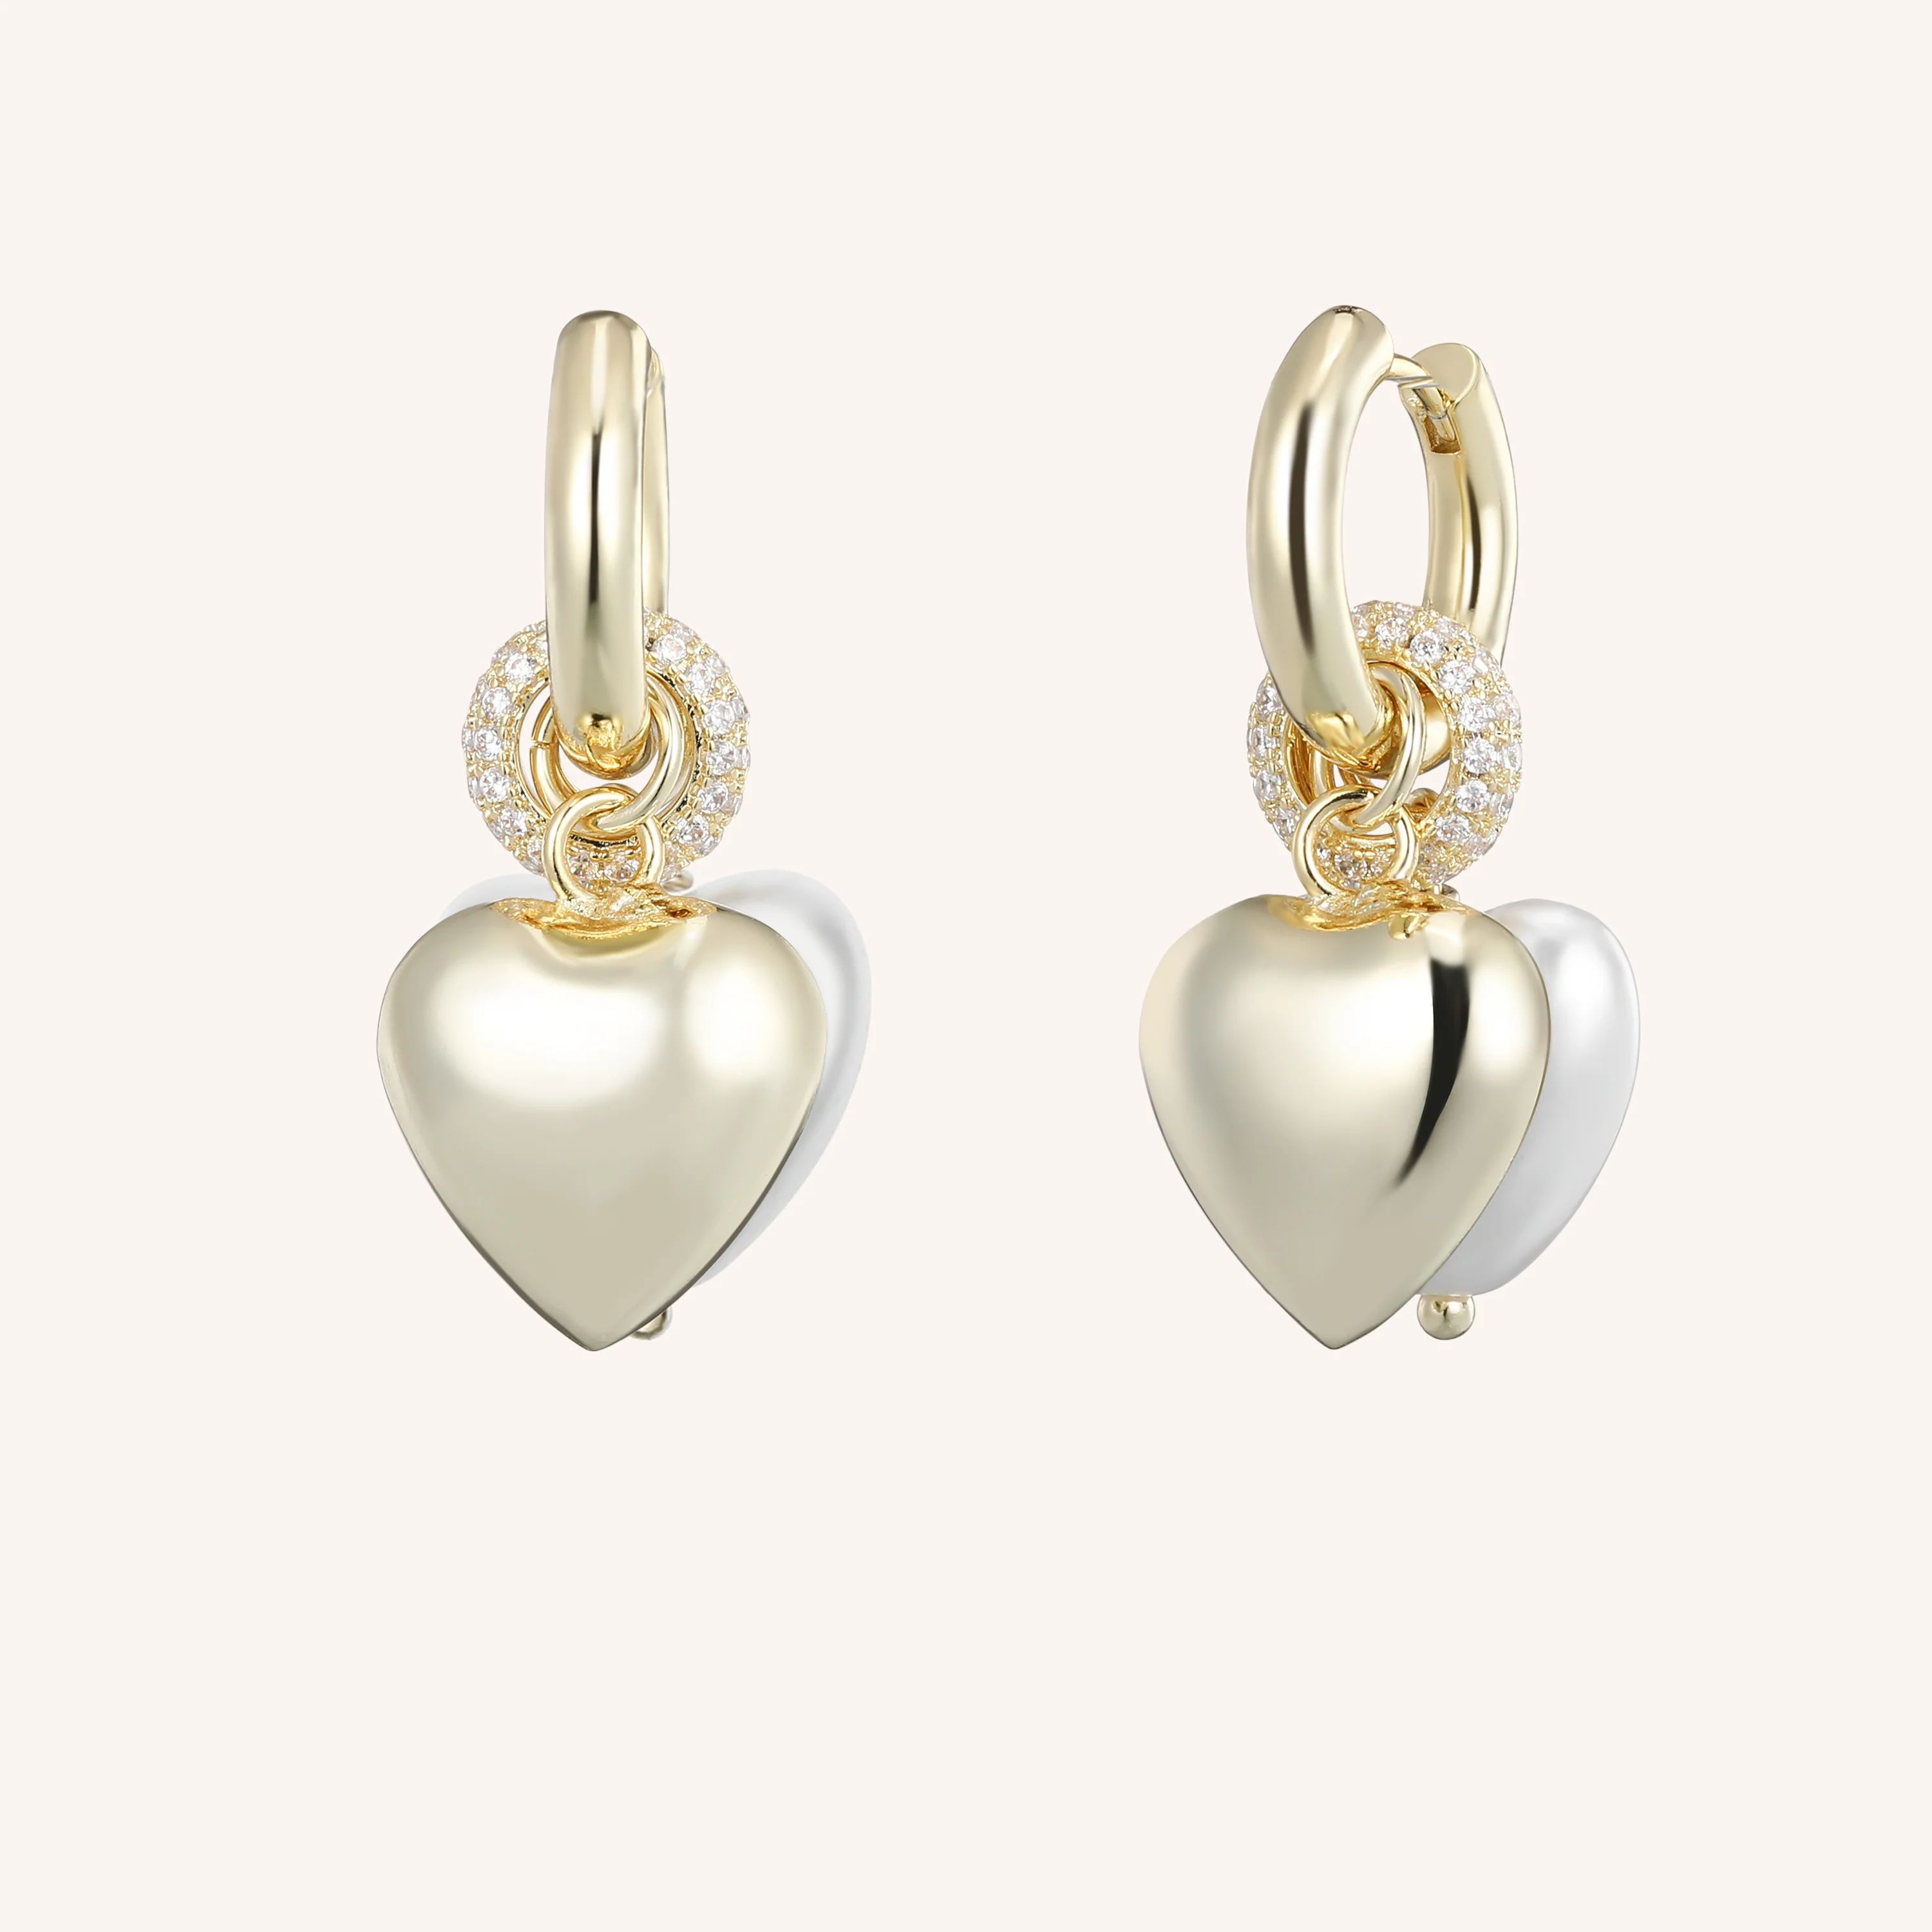 Speaking of Romance Earring Set - Gold | Victoria Emerson